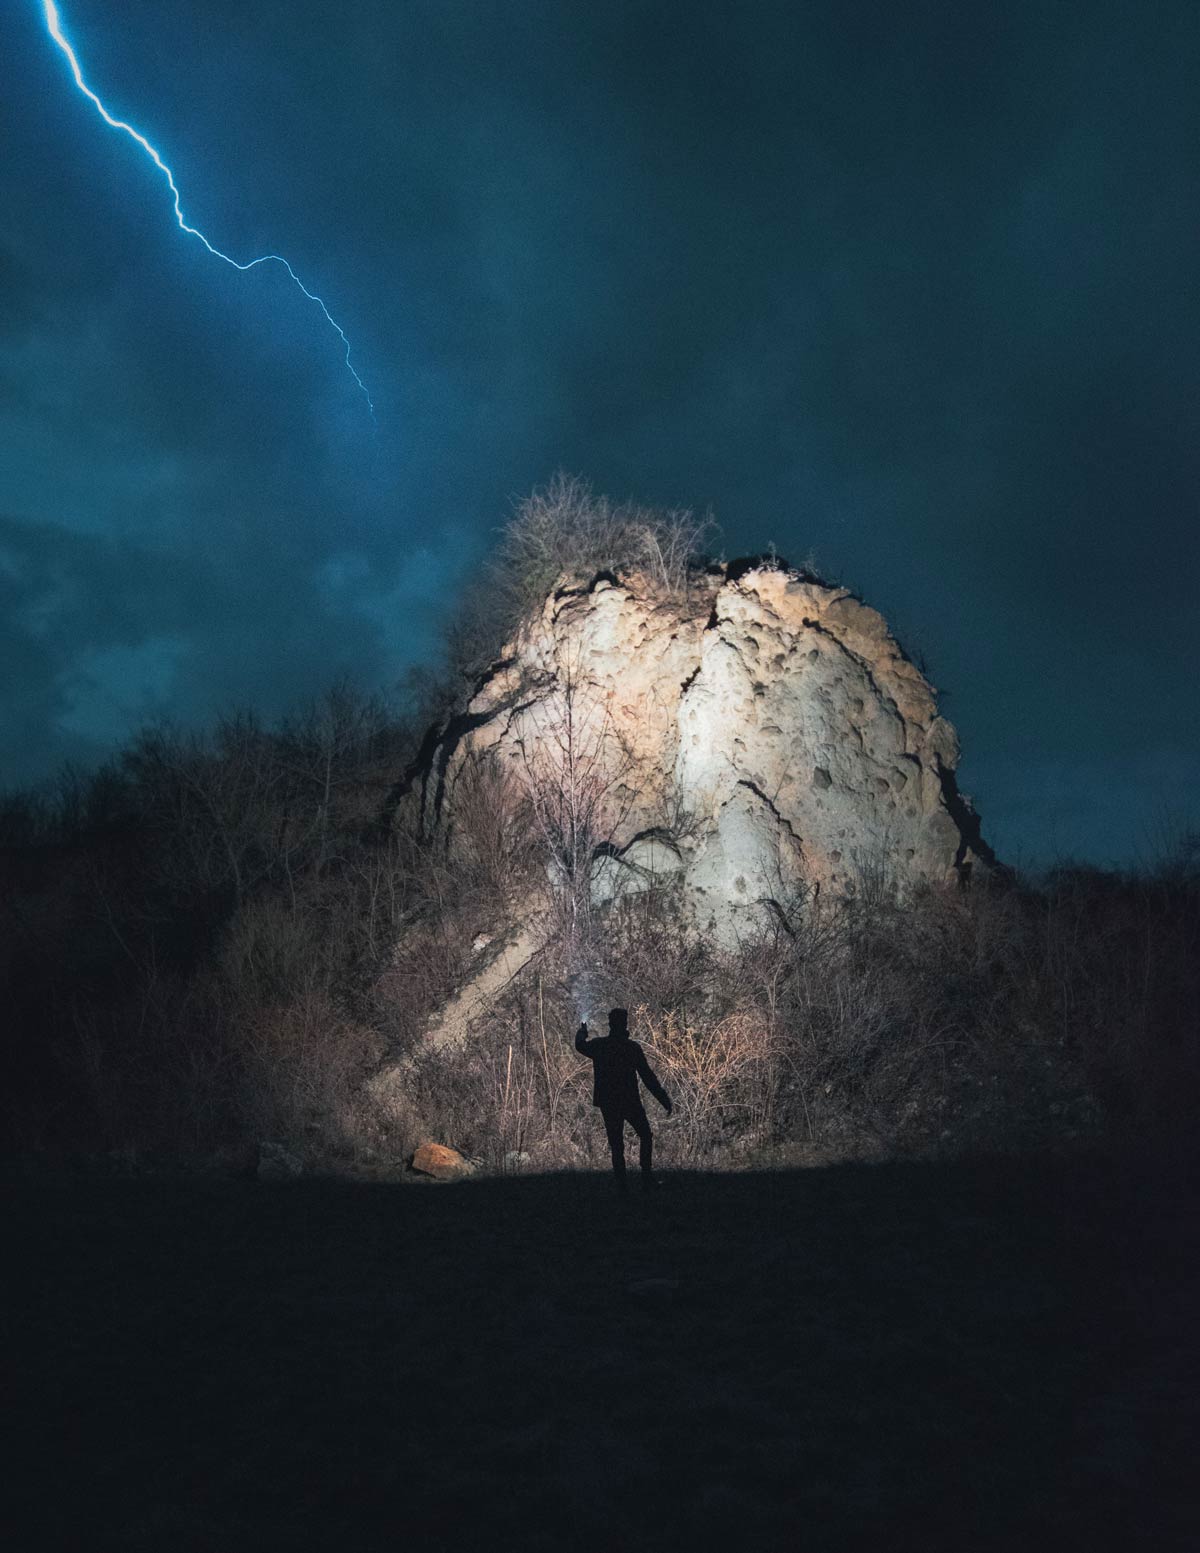 Hiker in lightning storm in front of mountain.